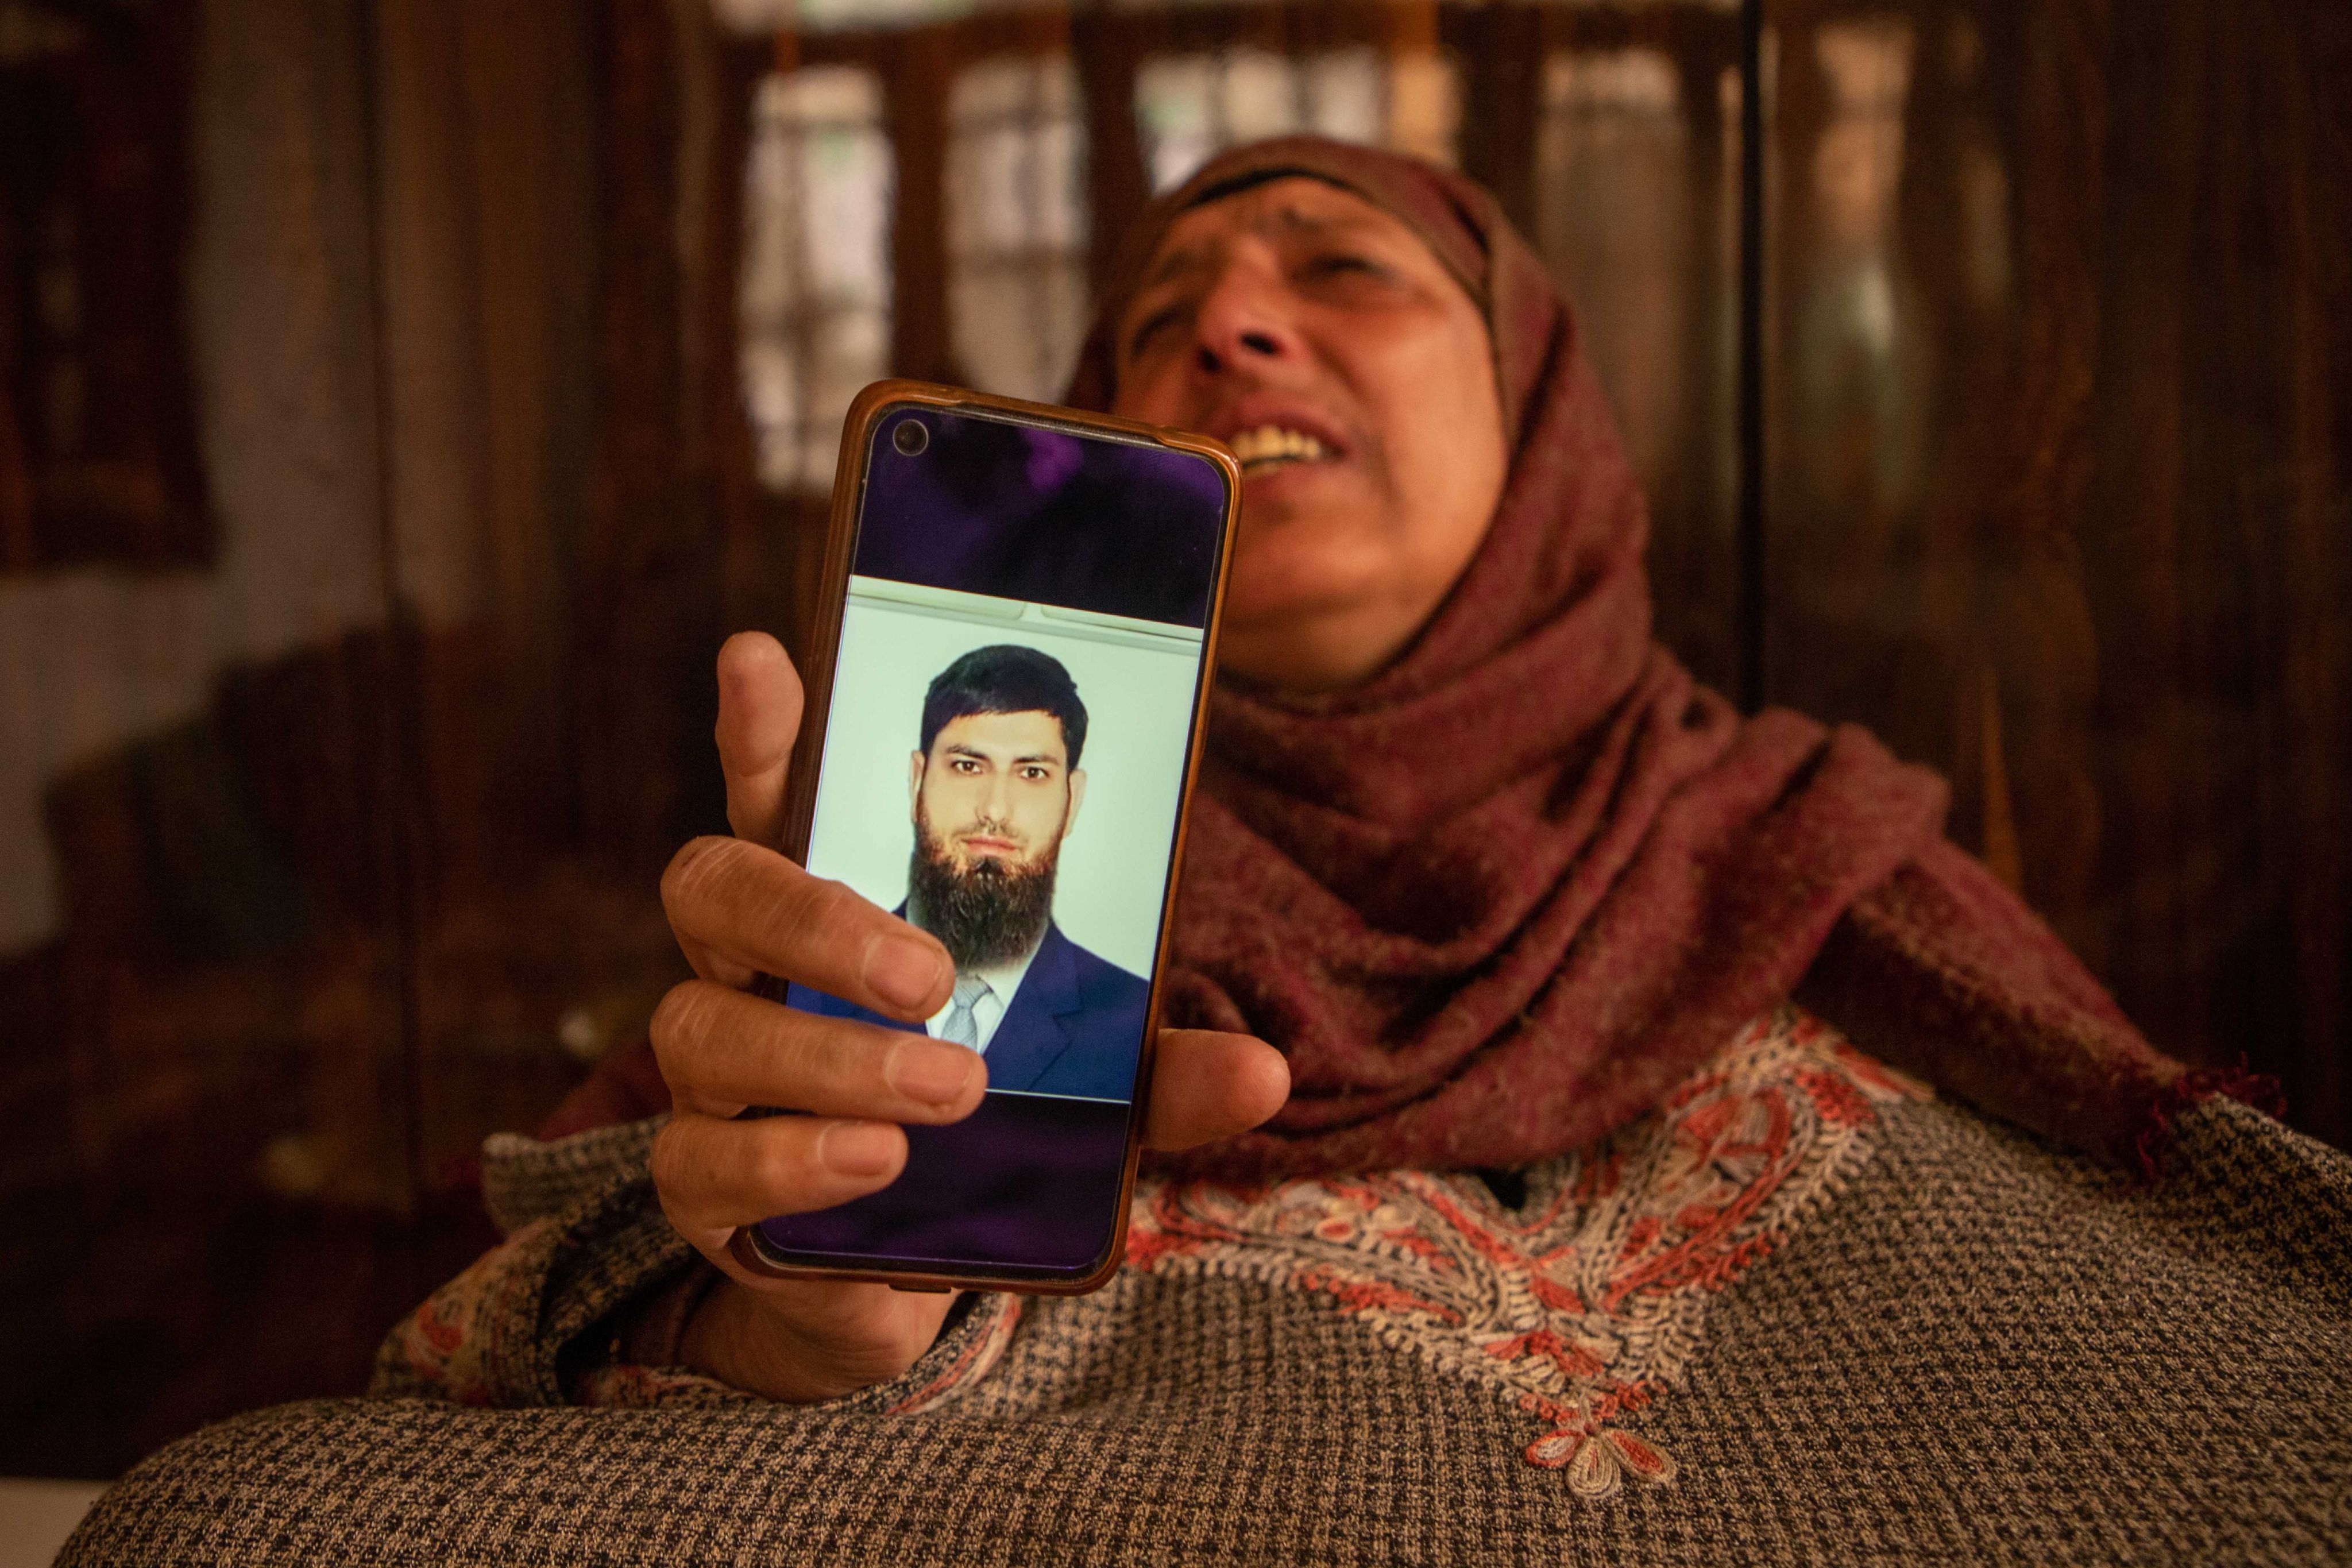 Raja Banu, 60, shows a picture of her son Aazad. According to his family, Aazad was misled into fighting for Russia in its war in Ukraine. Photo: Umer Asif